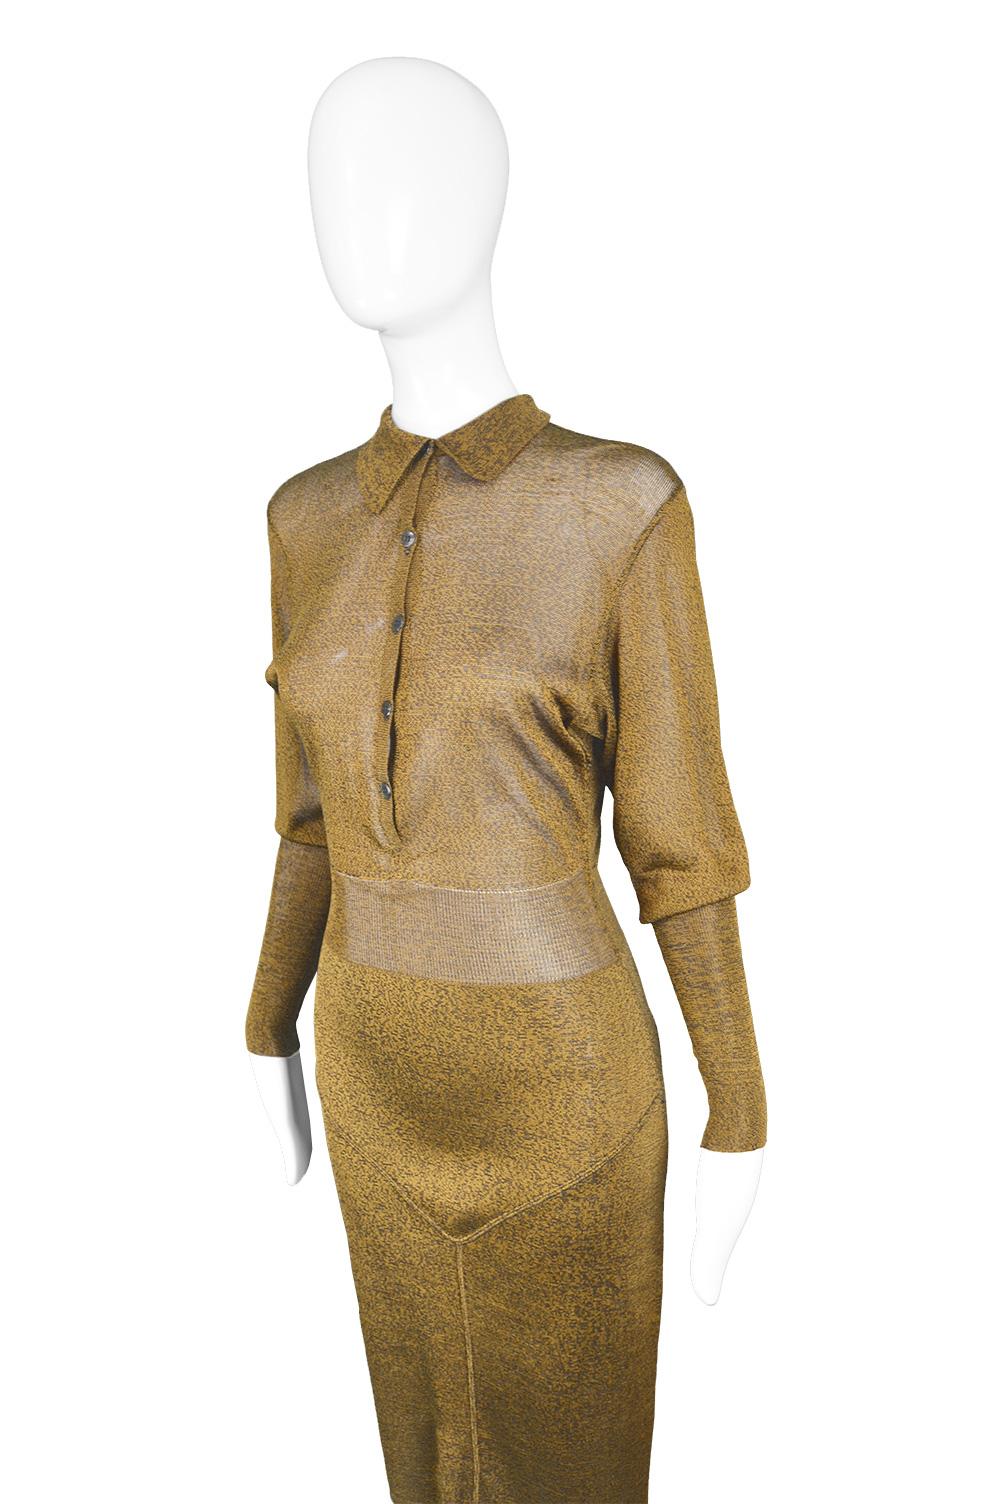 Women's Azzedine Alaia Vintage Gold and Black Rayon Knit Long Sleeve Dress, 1980s